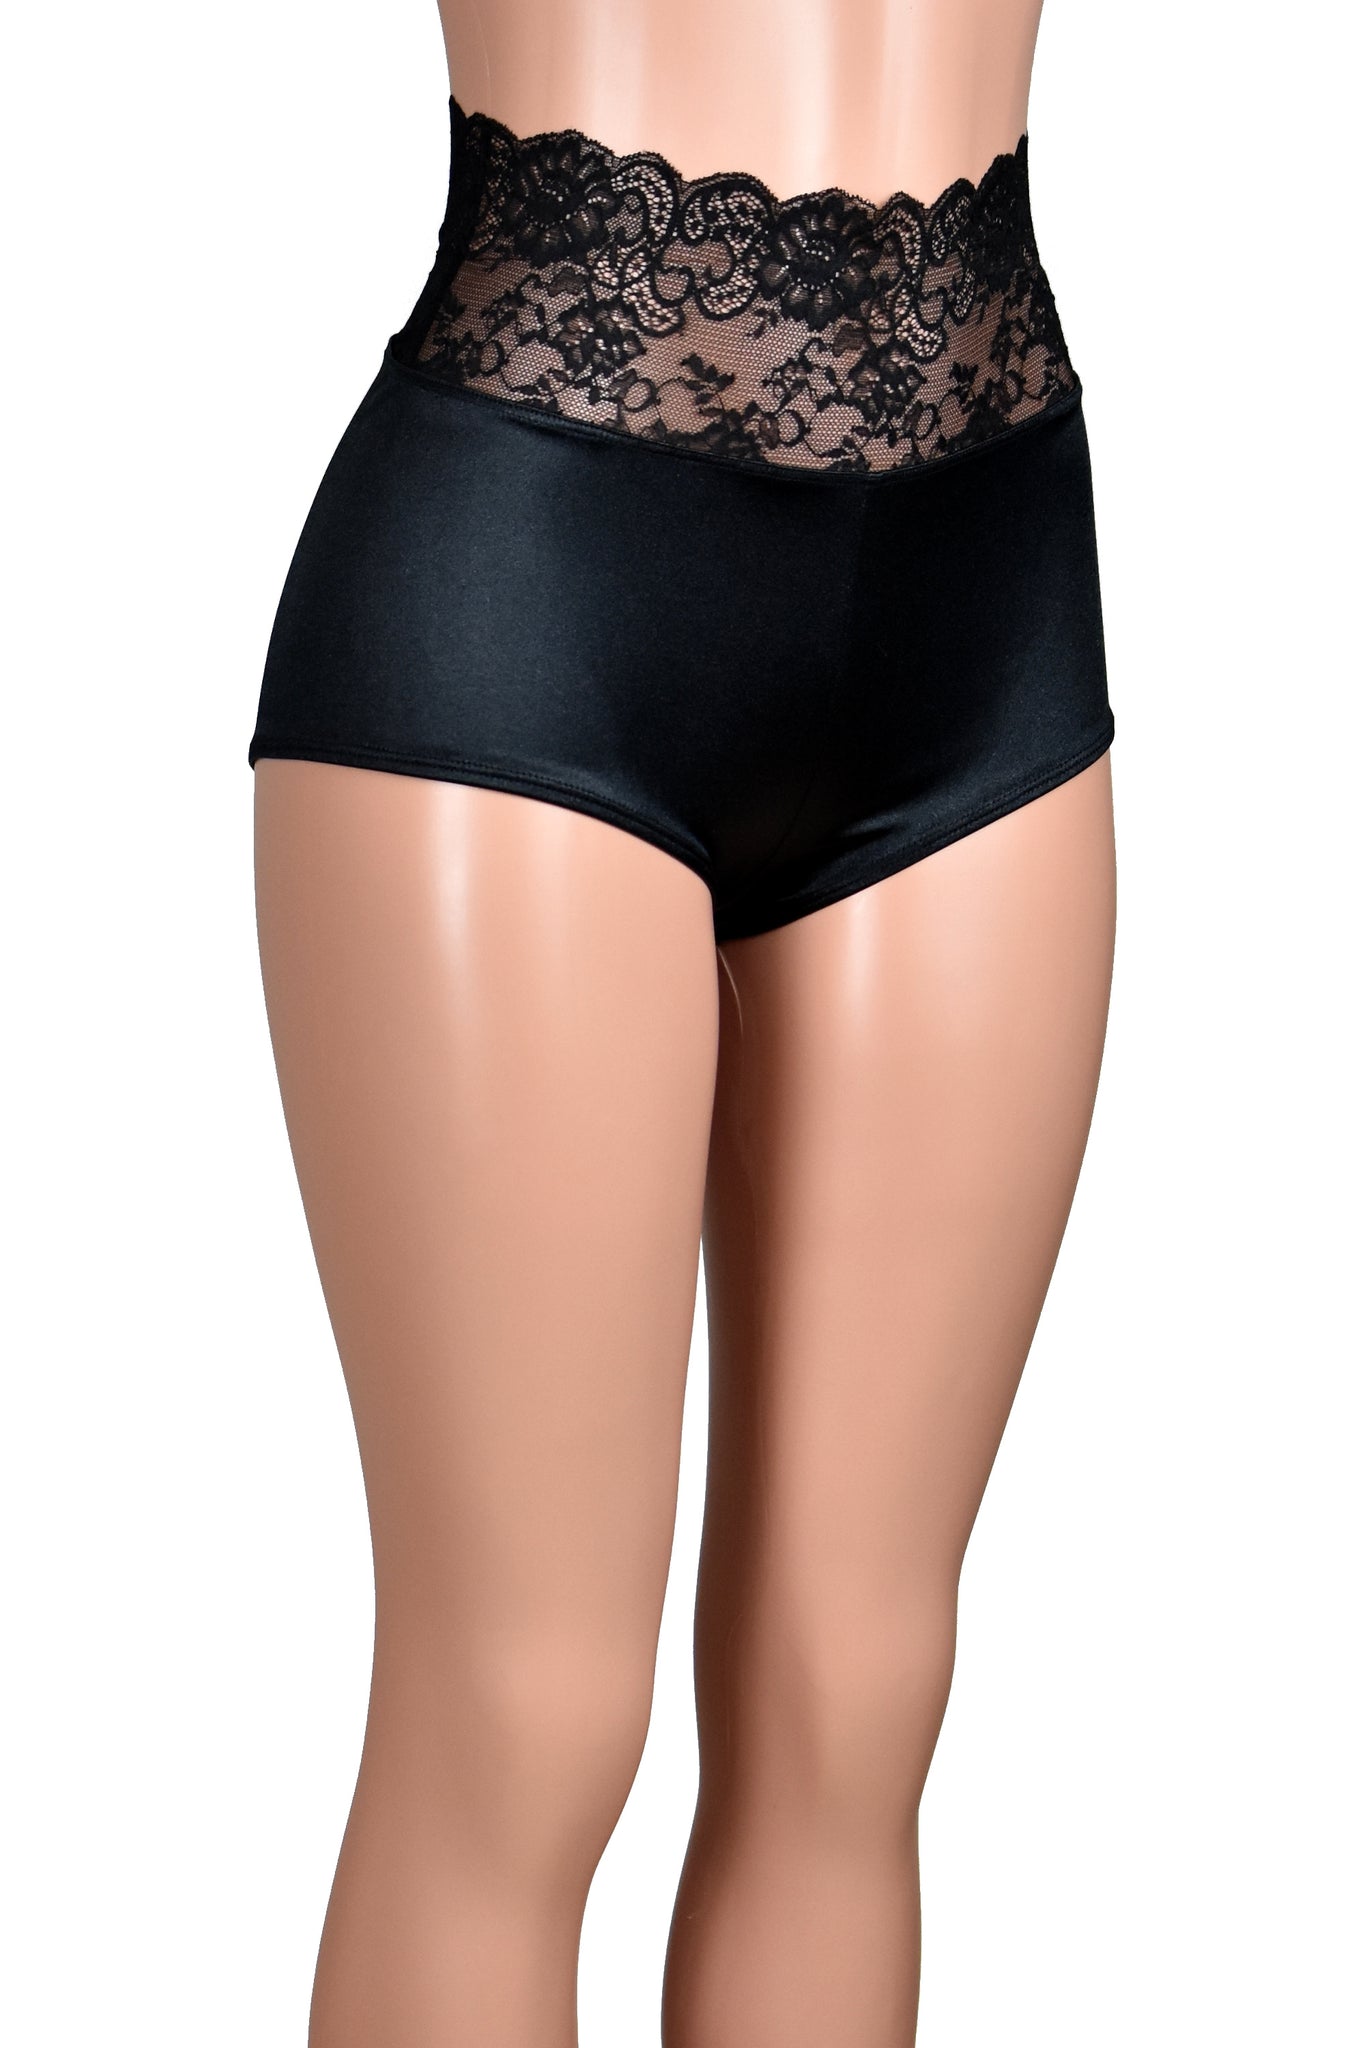 High-Waisted Black Stretch Satin and Lace Booty Shorts lingerie